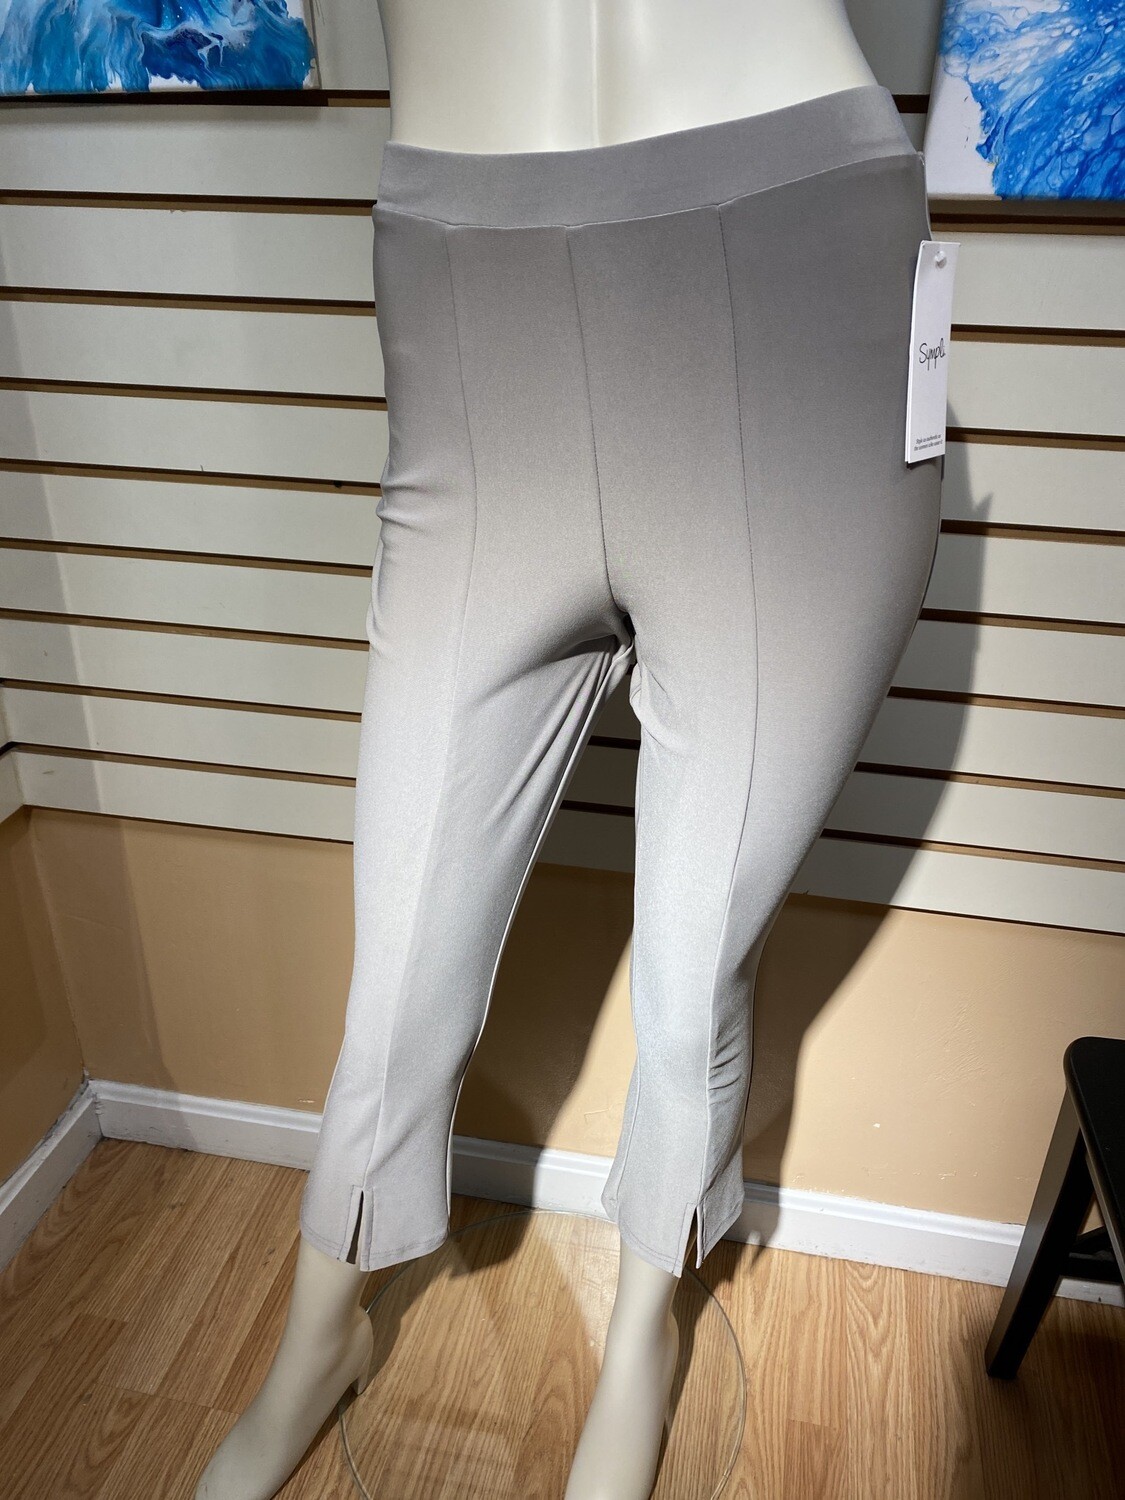 Major Deal! Sympli Kick Flare Pant Taupe/Tan Only 4 Left. Great Summer All The Time Pant. 